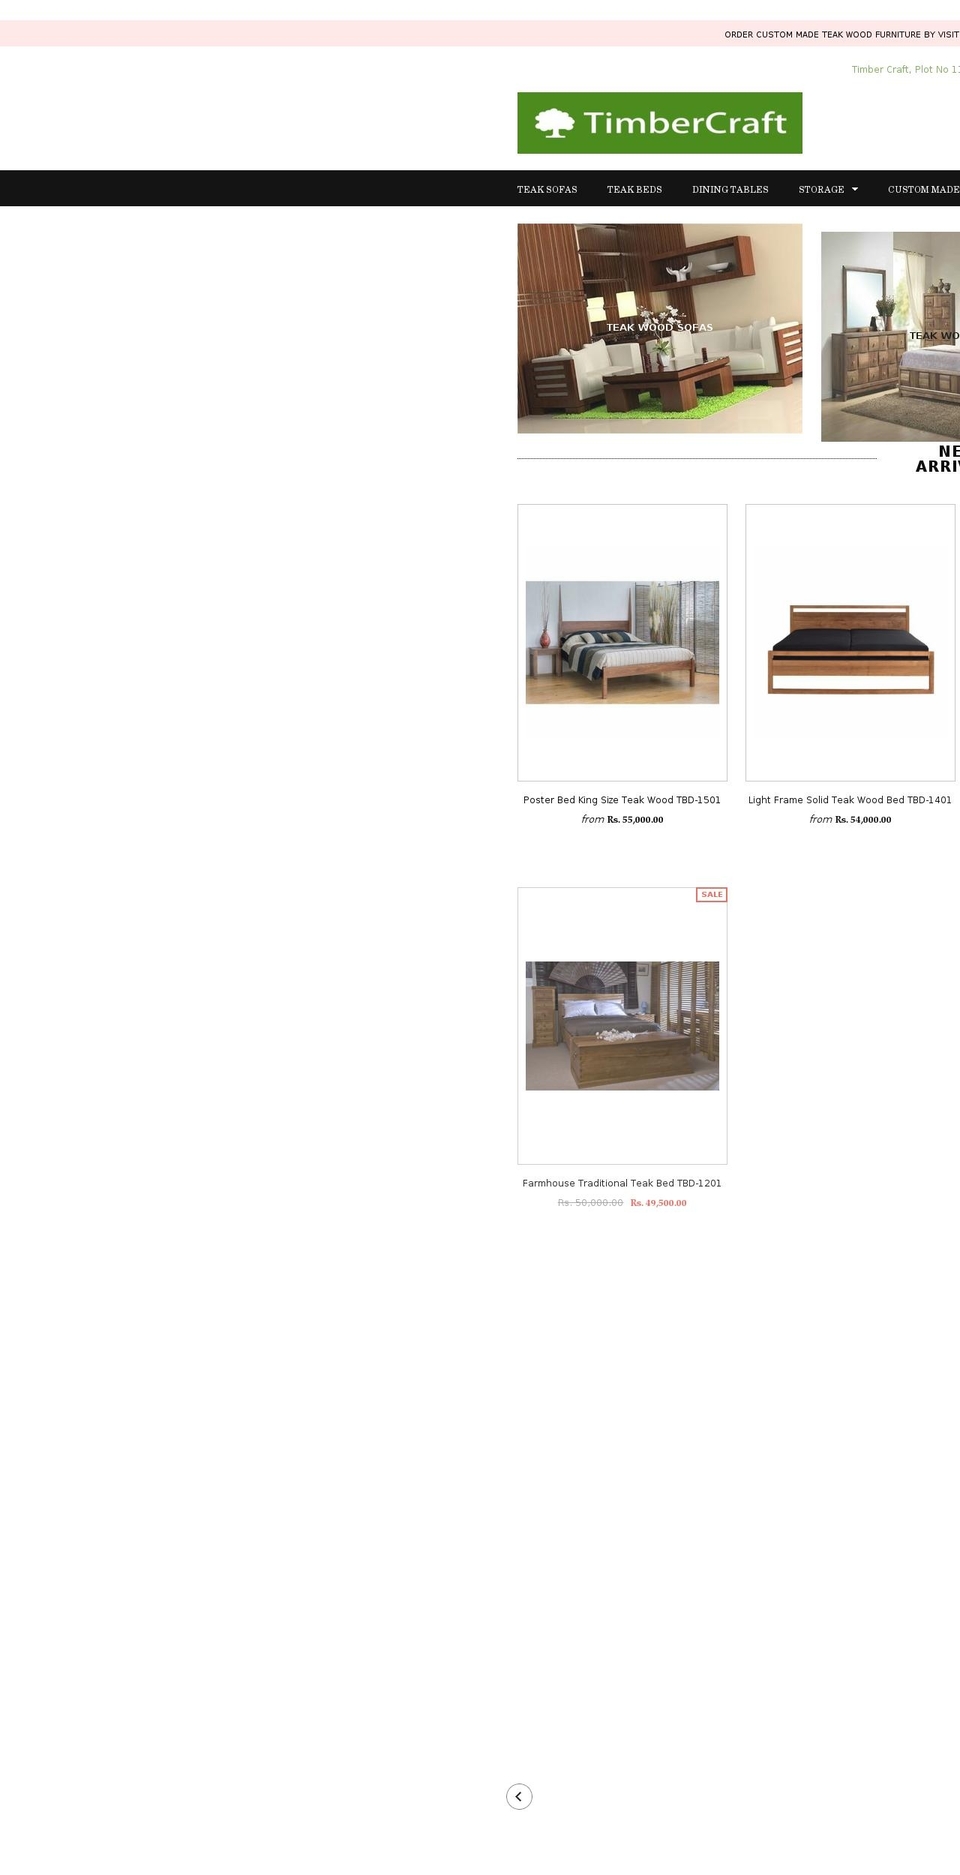 Ella Shopify theme site example timbercraft.in